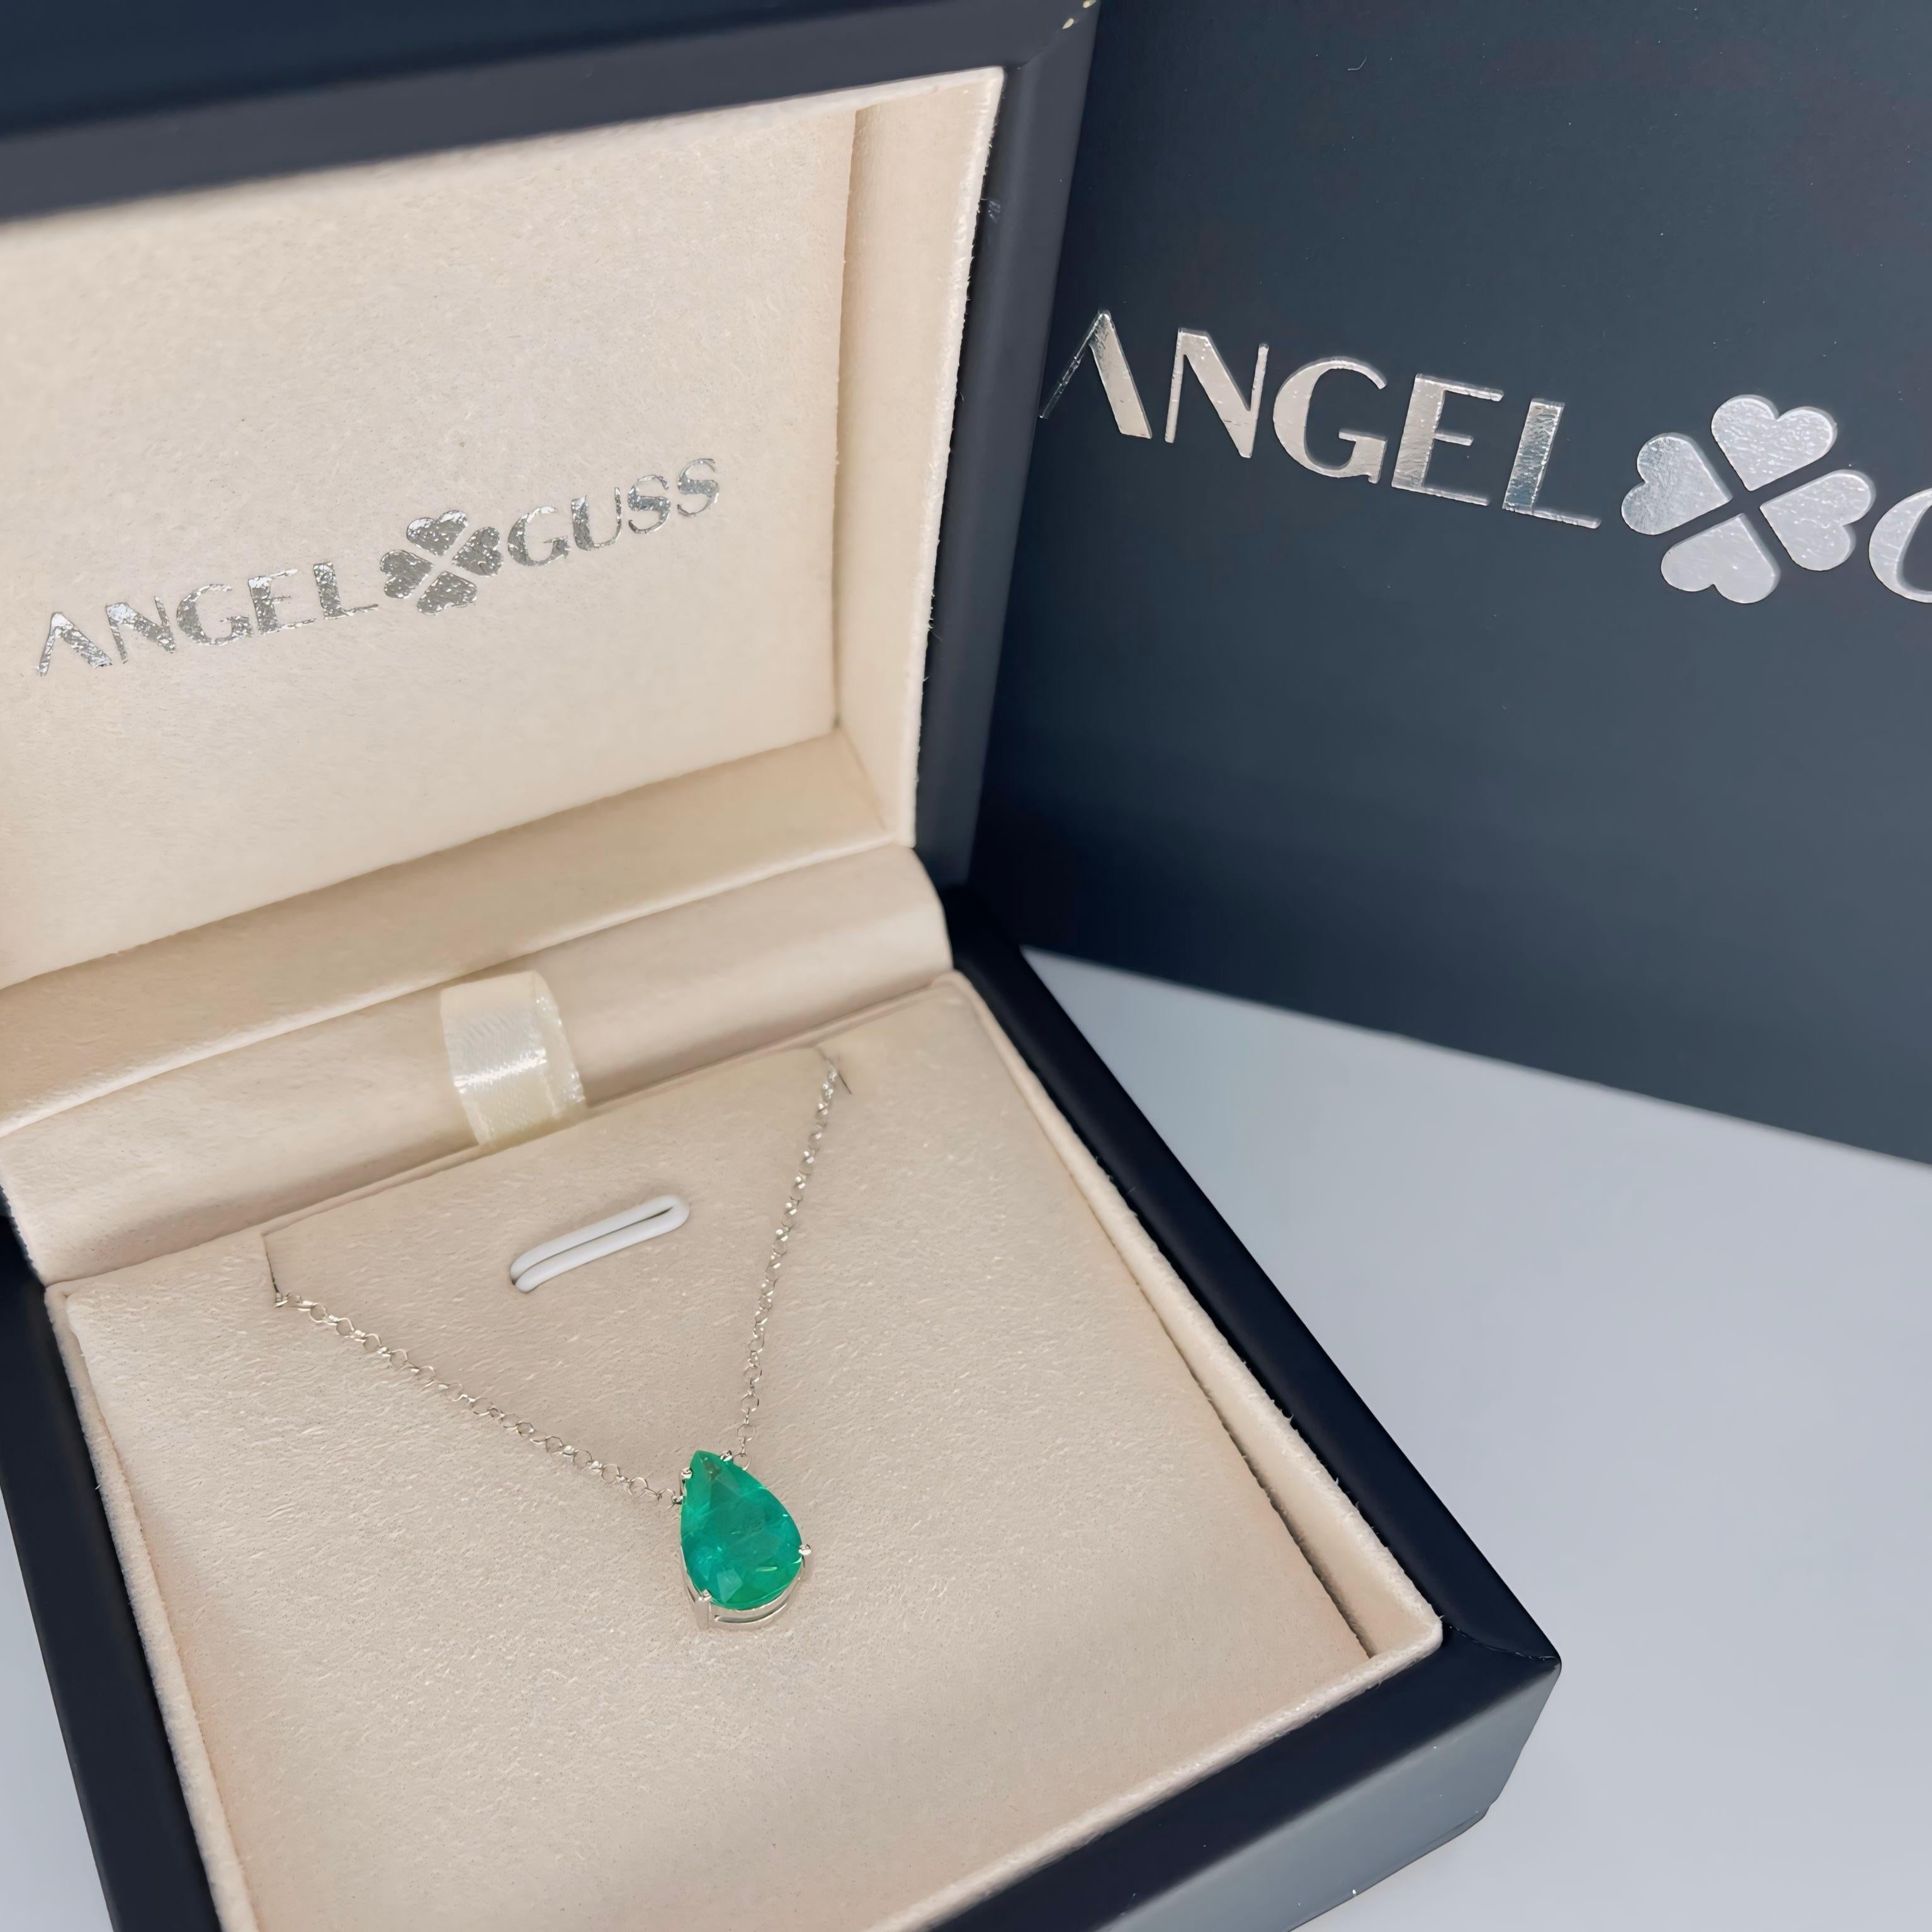  18K Solid White Gold 

Natural Emerald Gemstone: Pear Shape, Size 11.26 x 7.31 x 4.05mm, Weight 1.79 cts

Gross Weight: 2.8g

*The pendant comes with the chain

*The chain has two size adjustments

The Emeralds are from Brazil.

People have admired